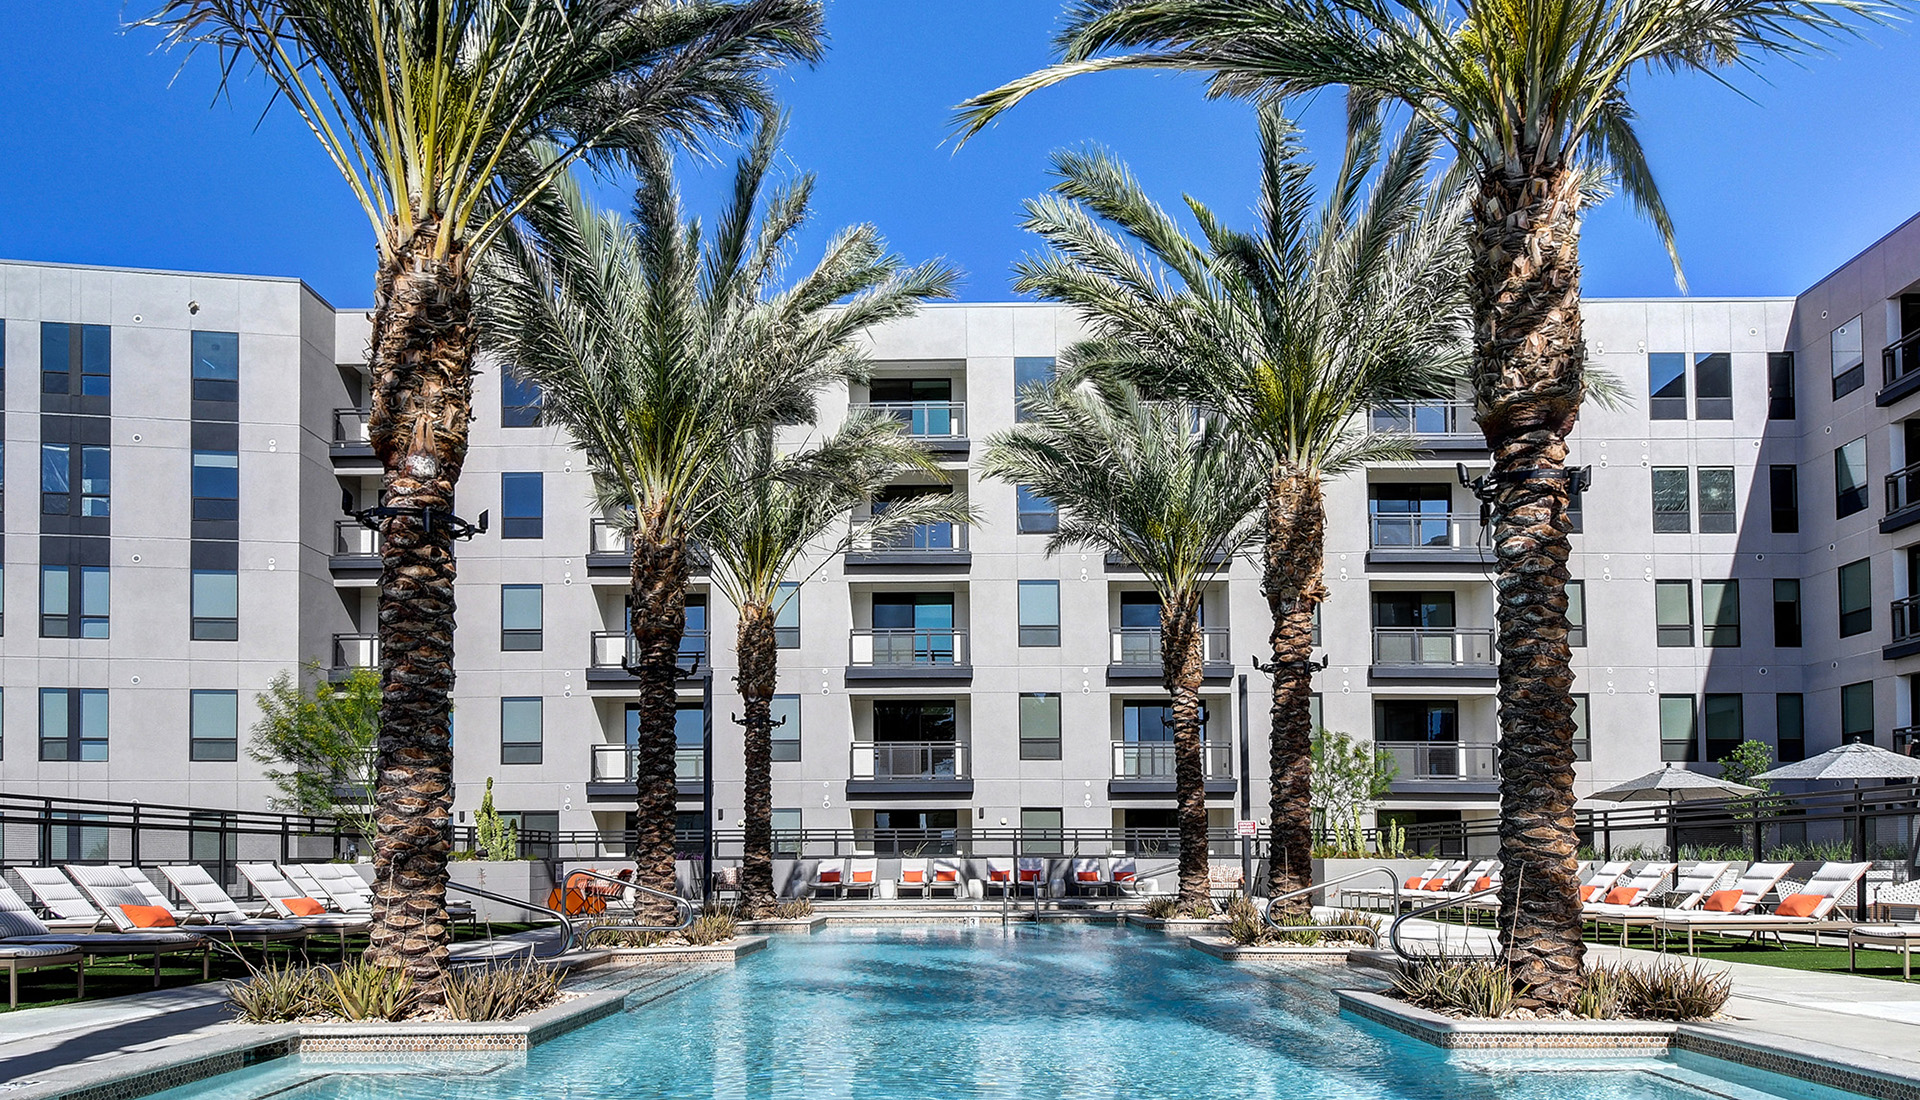 Pool in daytime with palm trees, lounge chairs with orange pillows, gray pool umbrellas and views of community